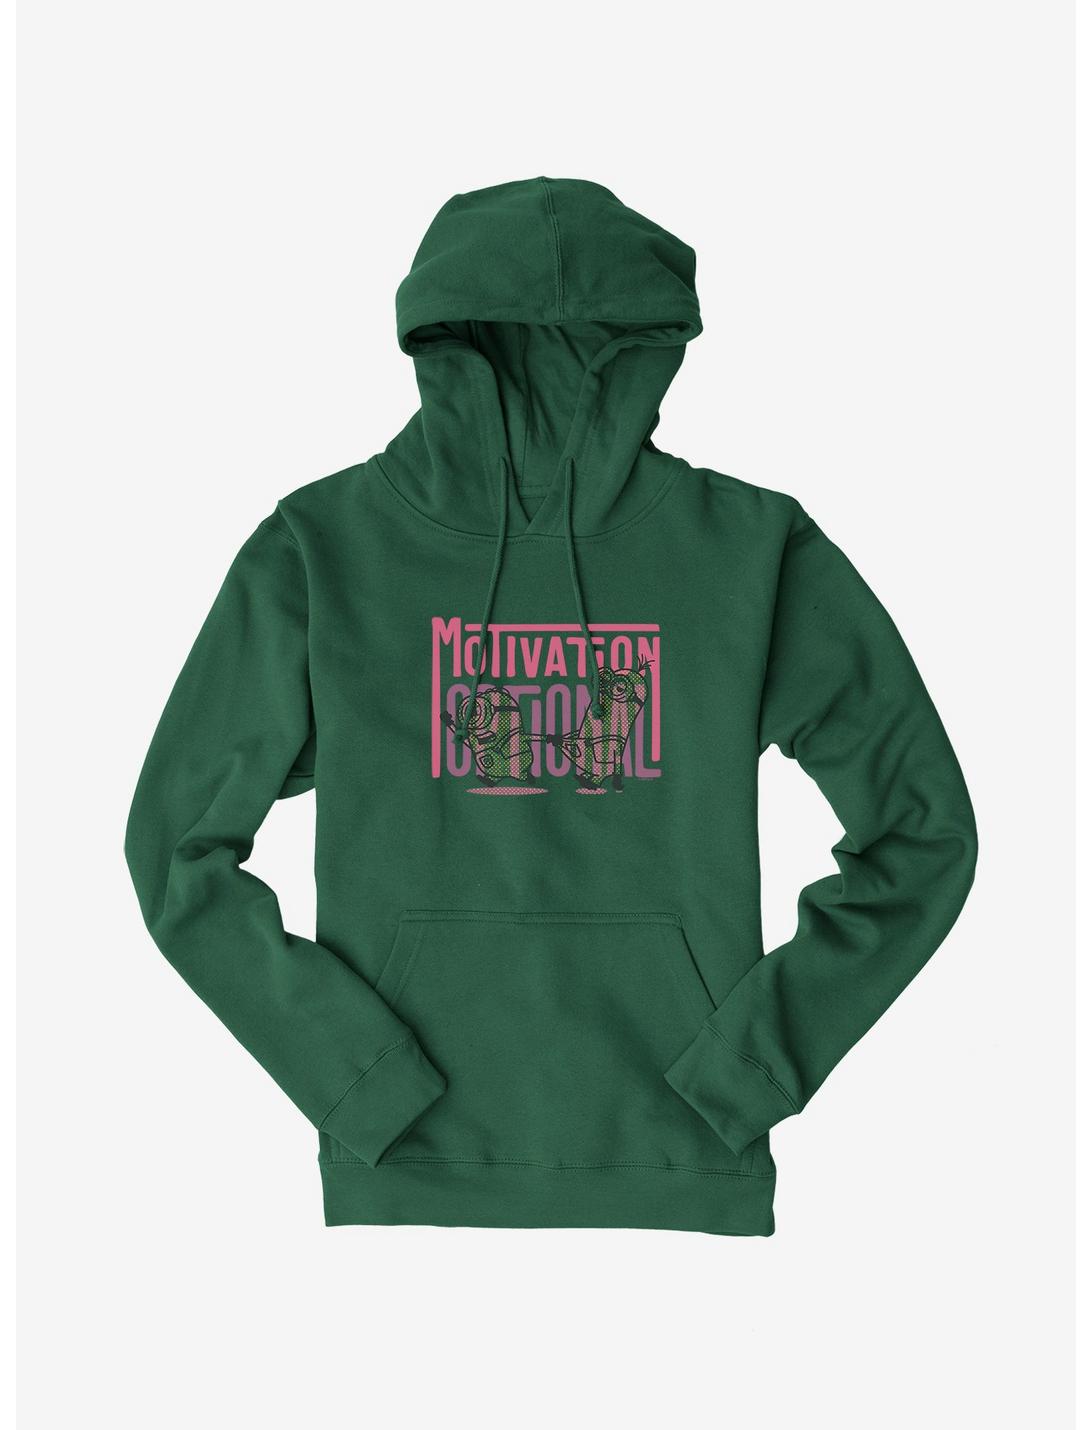 Minions Spotty Motivation Optional Hoodie, FOREST, hi-res